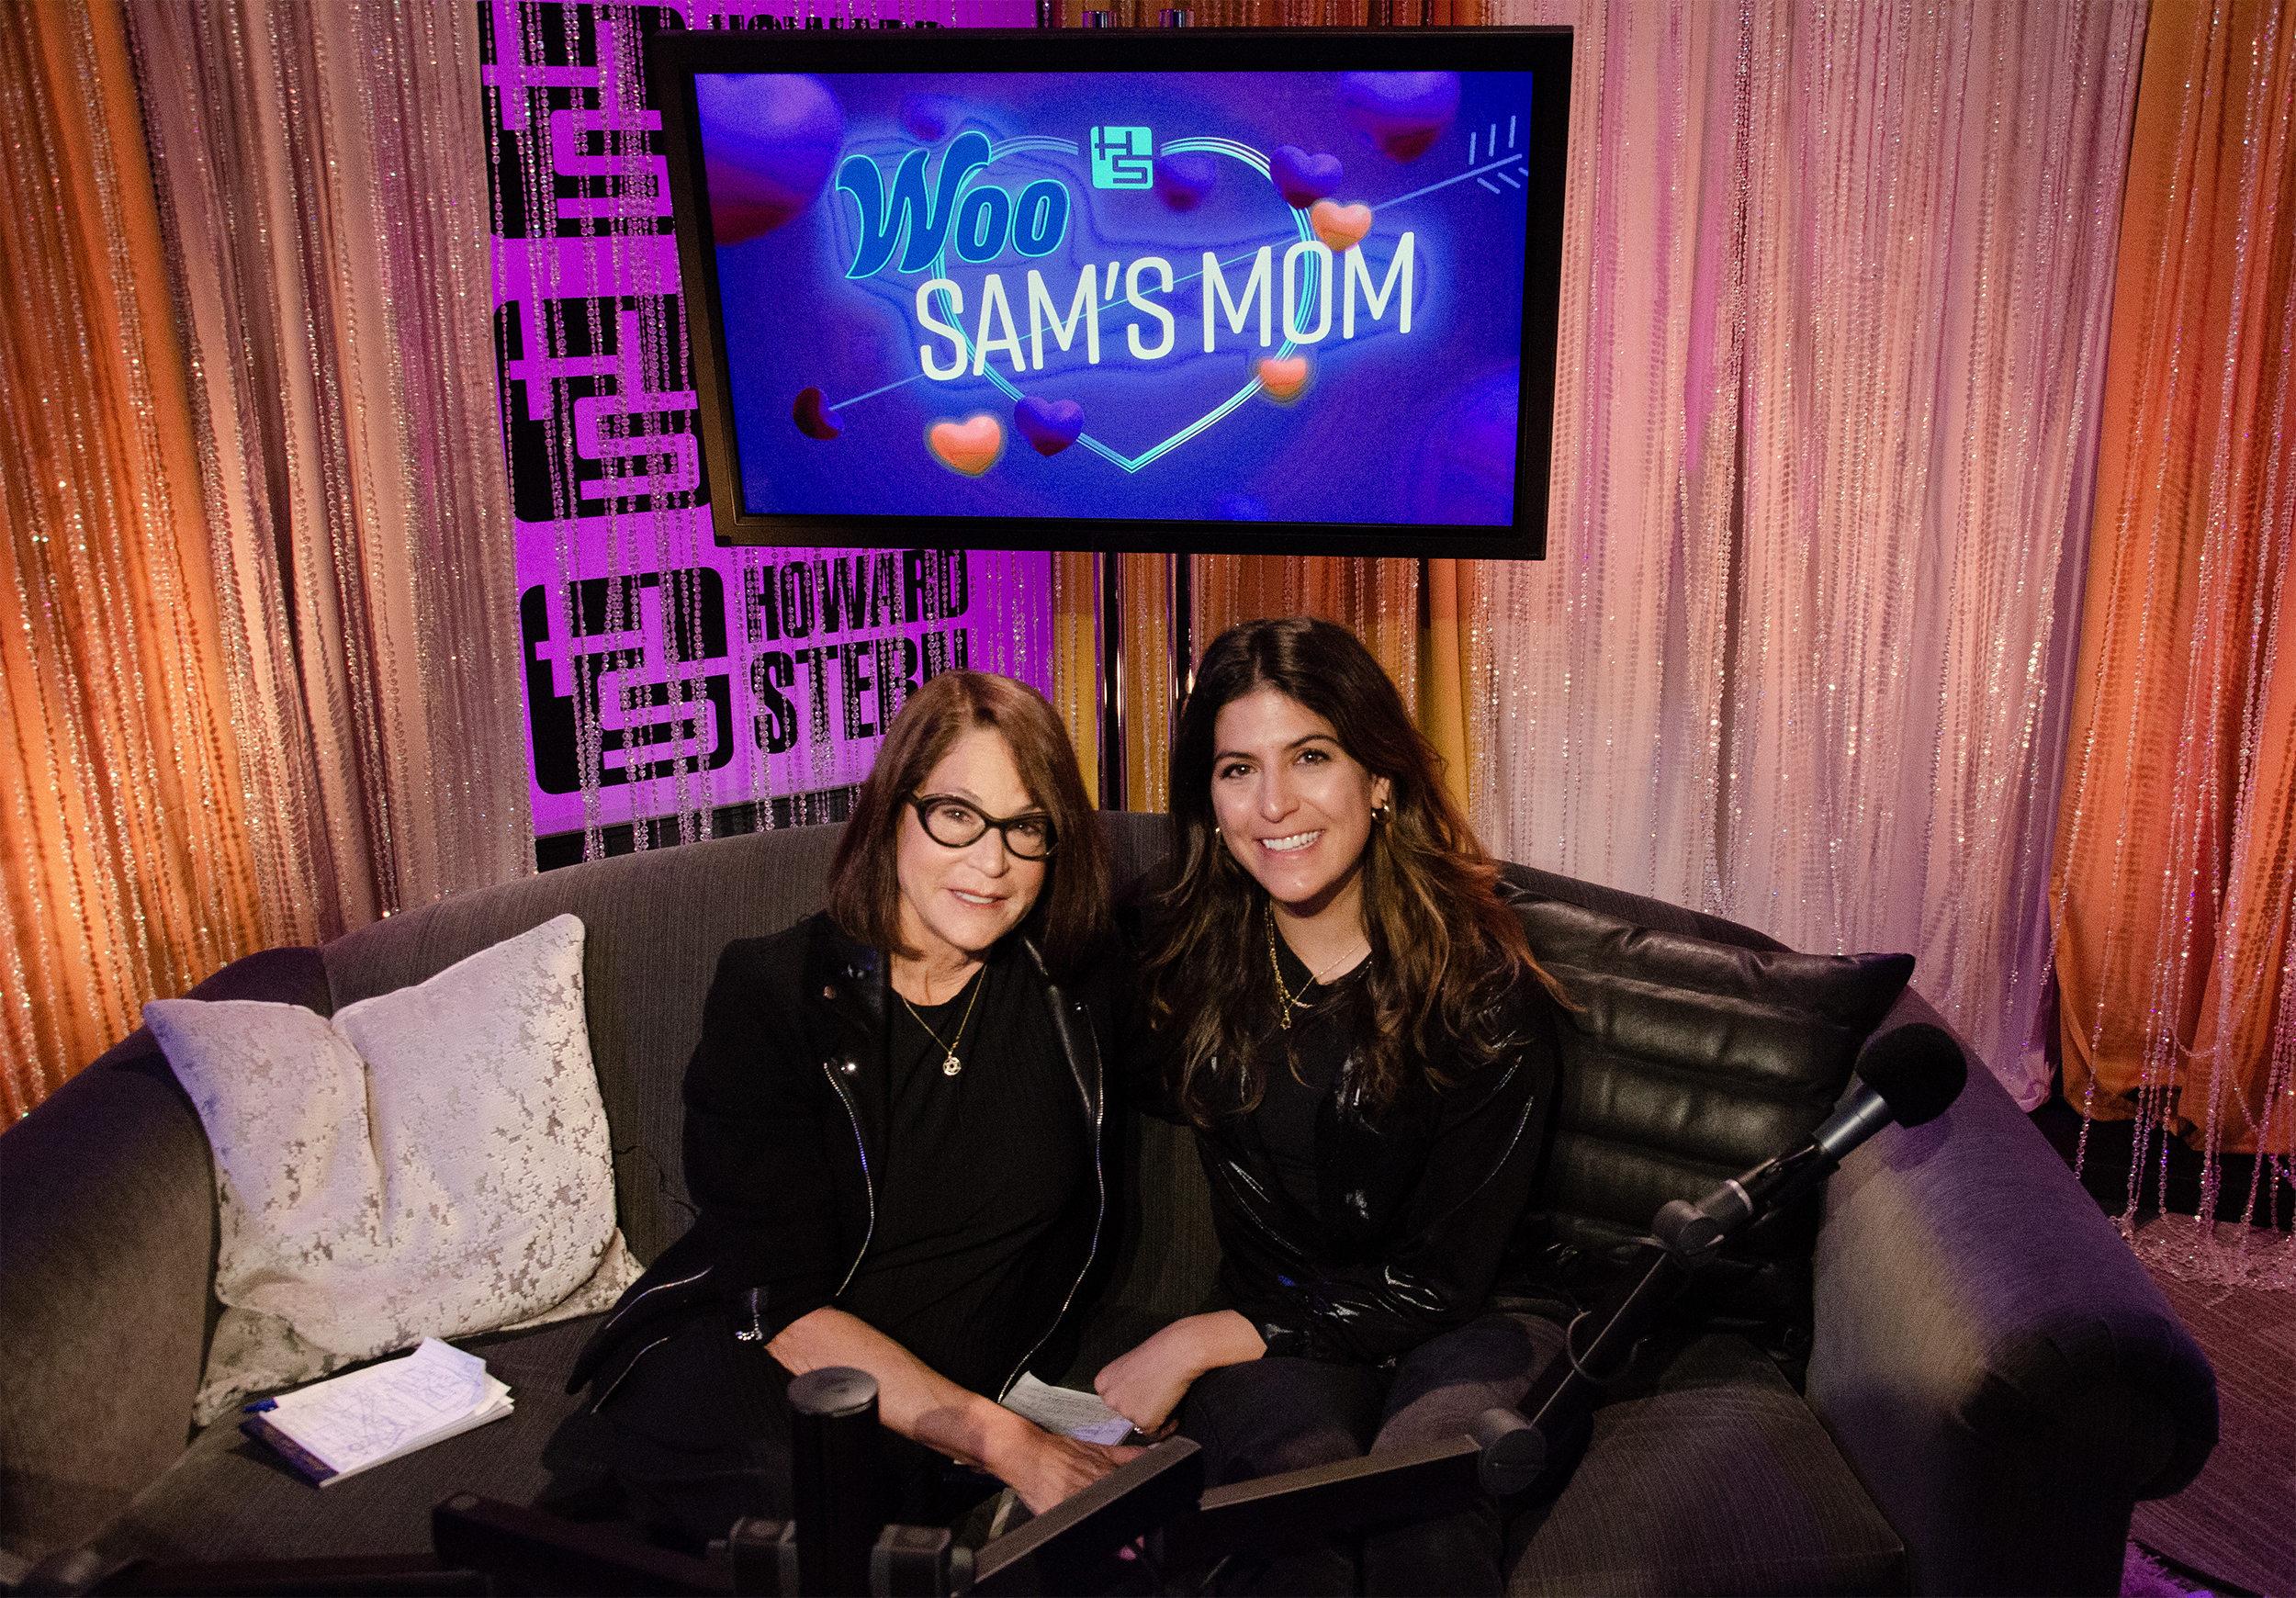 Samantha Photos Fuck - VIDEO & PHOTOS: 3 Bachelors Compete to Win a Date on Woo Sam's Mom | Howard  Stern